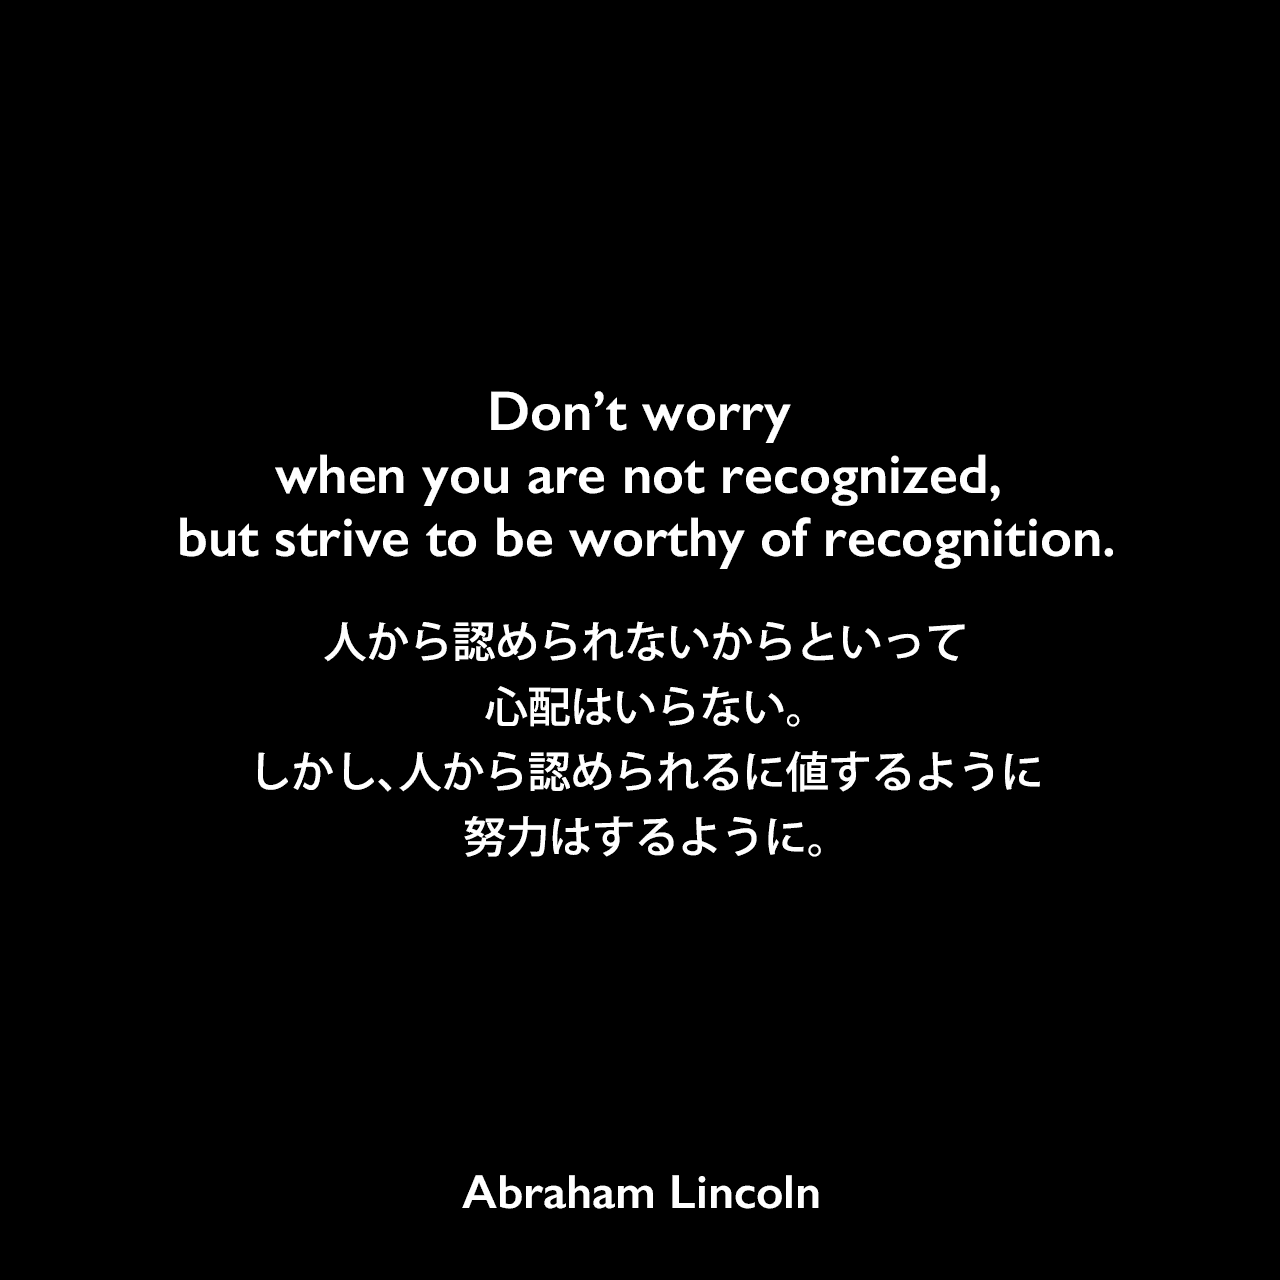 Don’t worry when you are not recognized, but strive to be worthy of recognition.人から認められないからといって心配はいらない。しかし、人から認められるに値するように努力はするように。Abraham Lincoln